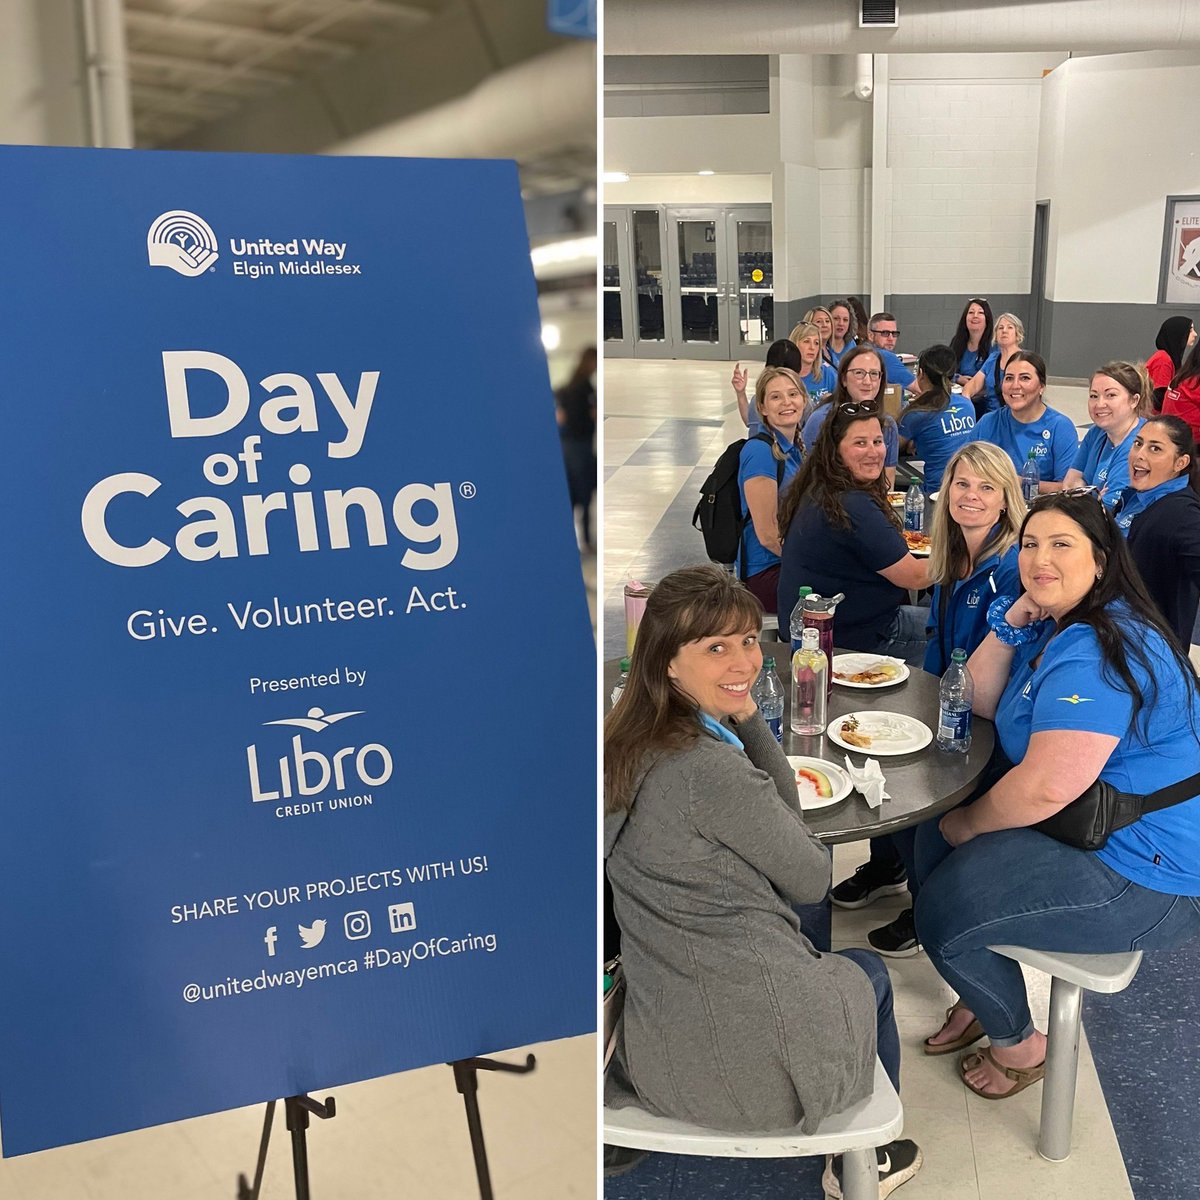 Always excited to have our @LibroCU  teams support @unitedwayemca #DayOfCaring